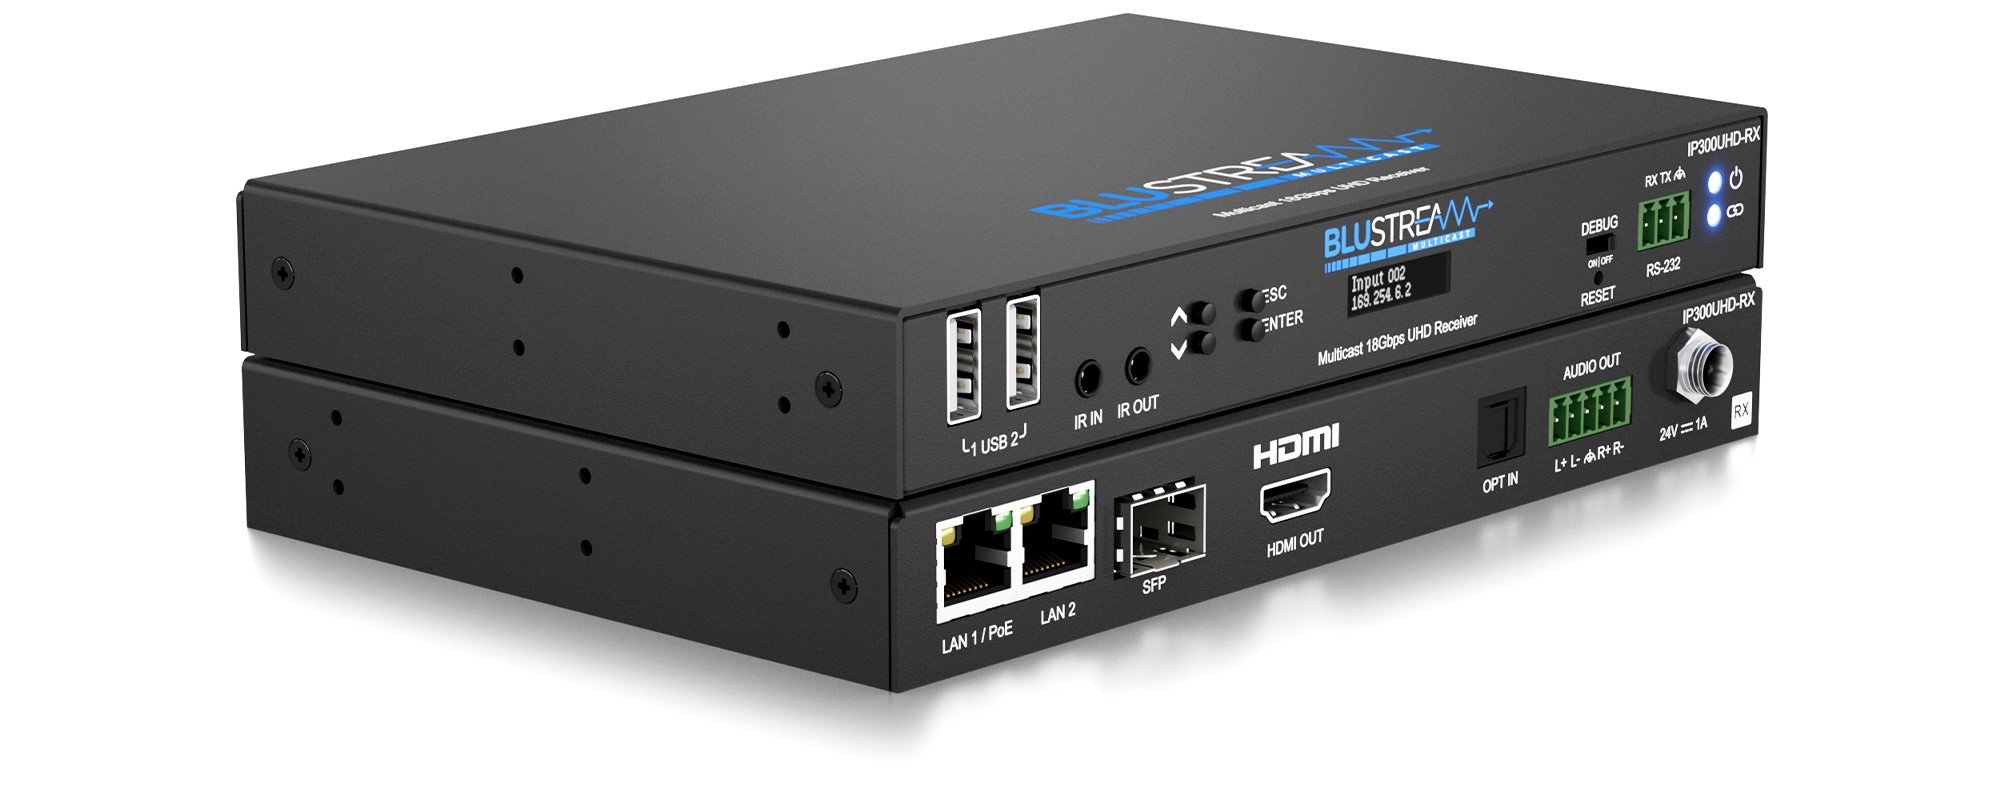 Blustream IP 18Gbps Multicast UHD Video Receiver over 1Gb Network